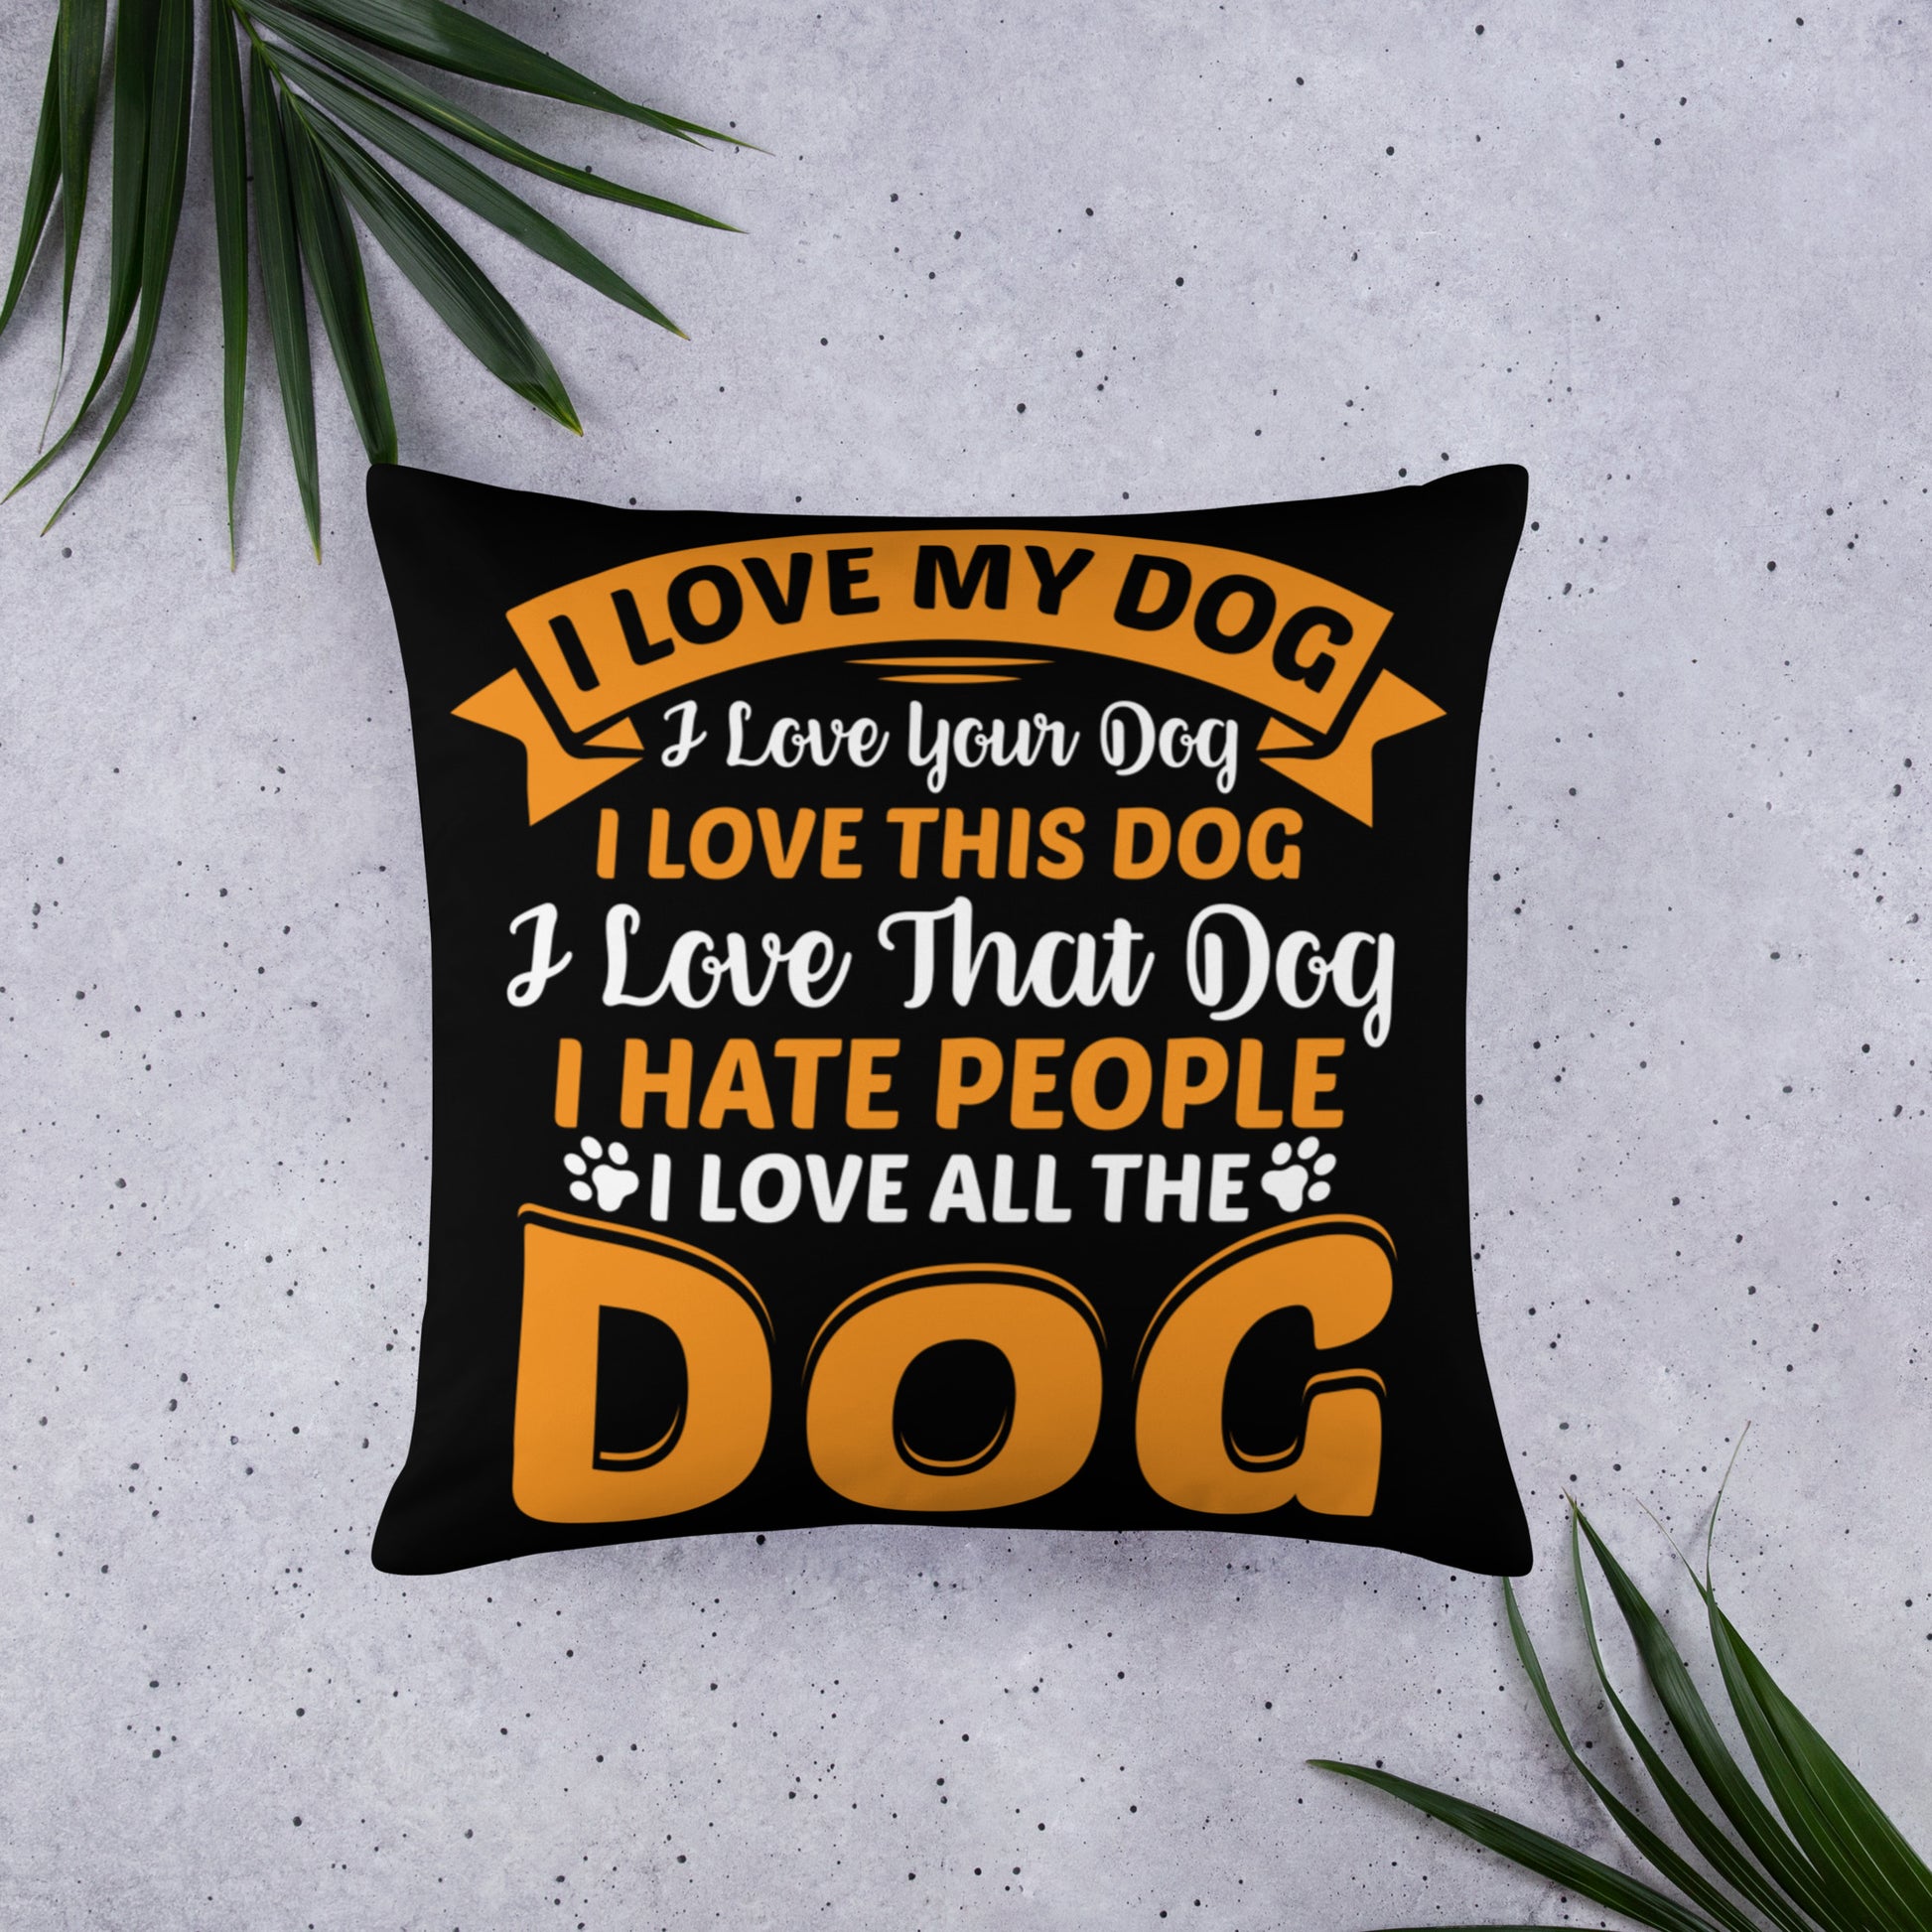 I Love My Dog I Love Your Dog I Love That Dog I Hate People I Love All the Dog Throw Pillow